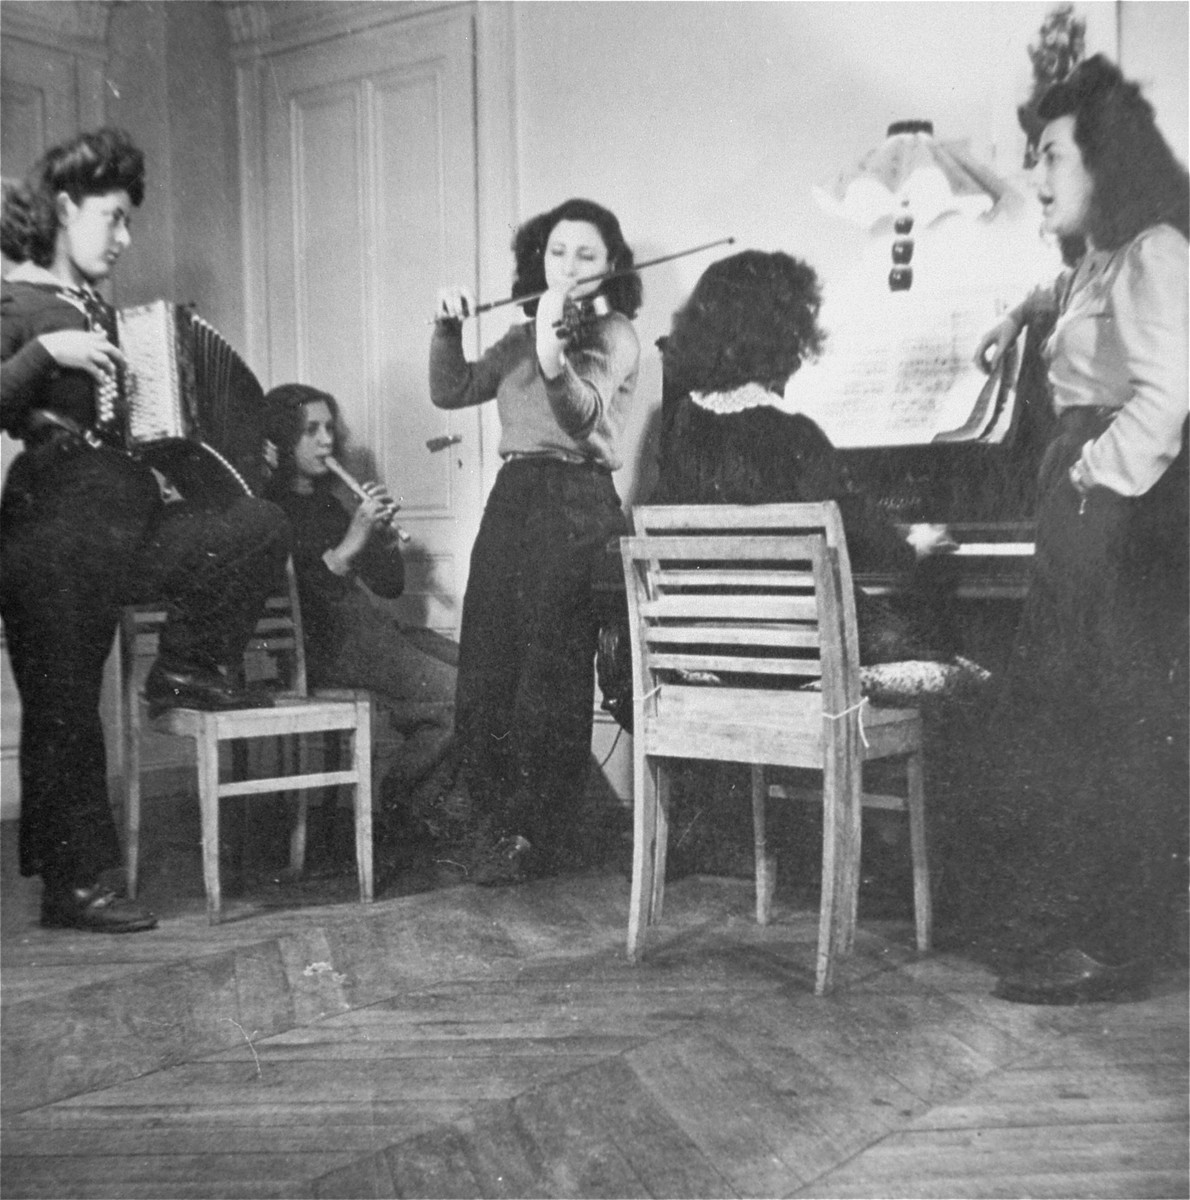 Young Jewish women living at the Le Tremplin children's home perform in a musical ensemble. 

Among those pictured is Paulette Knopp (left, playing the accordian).